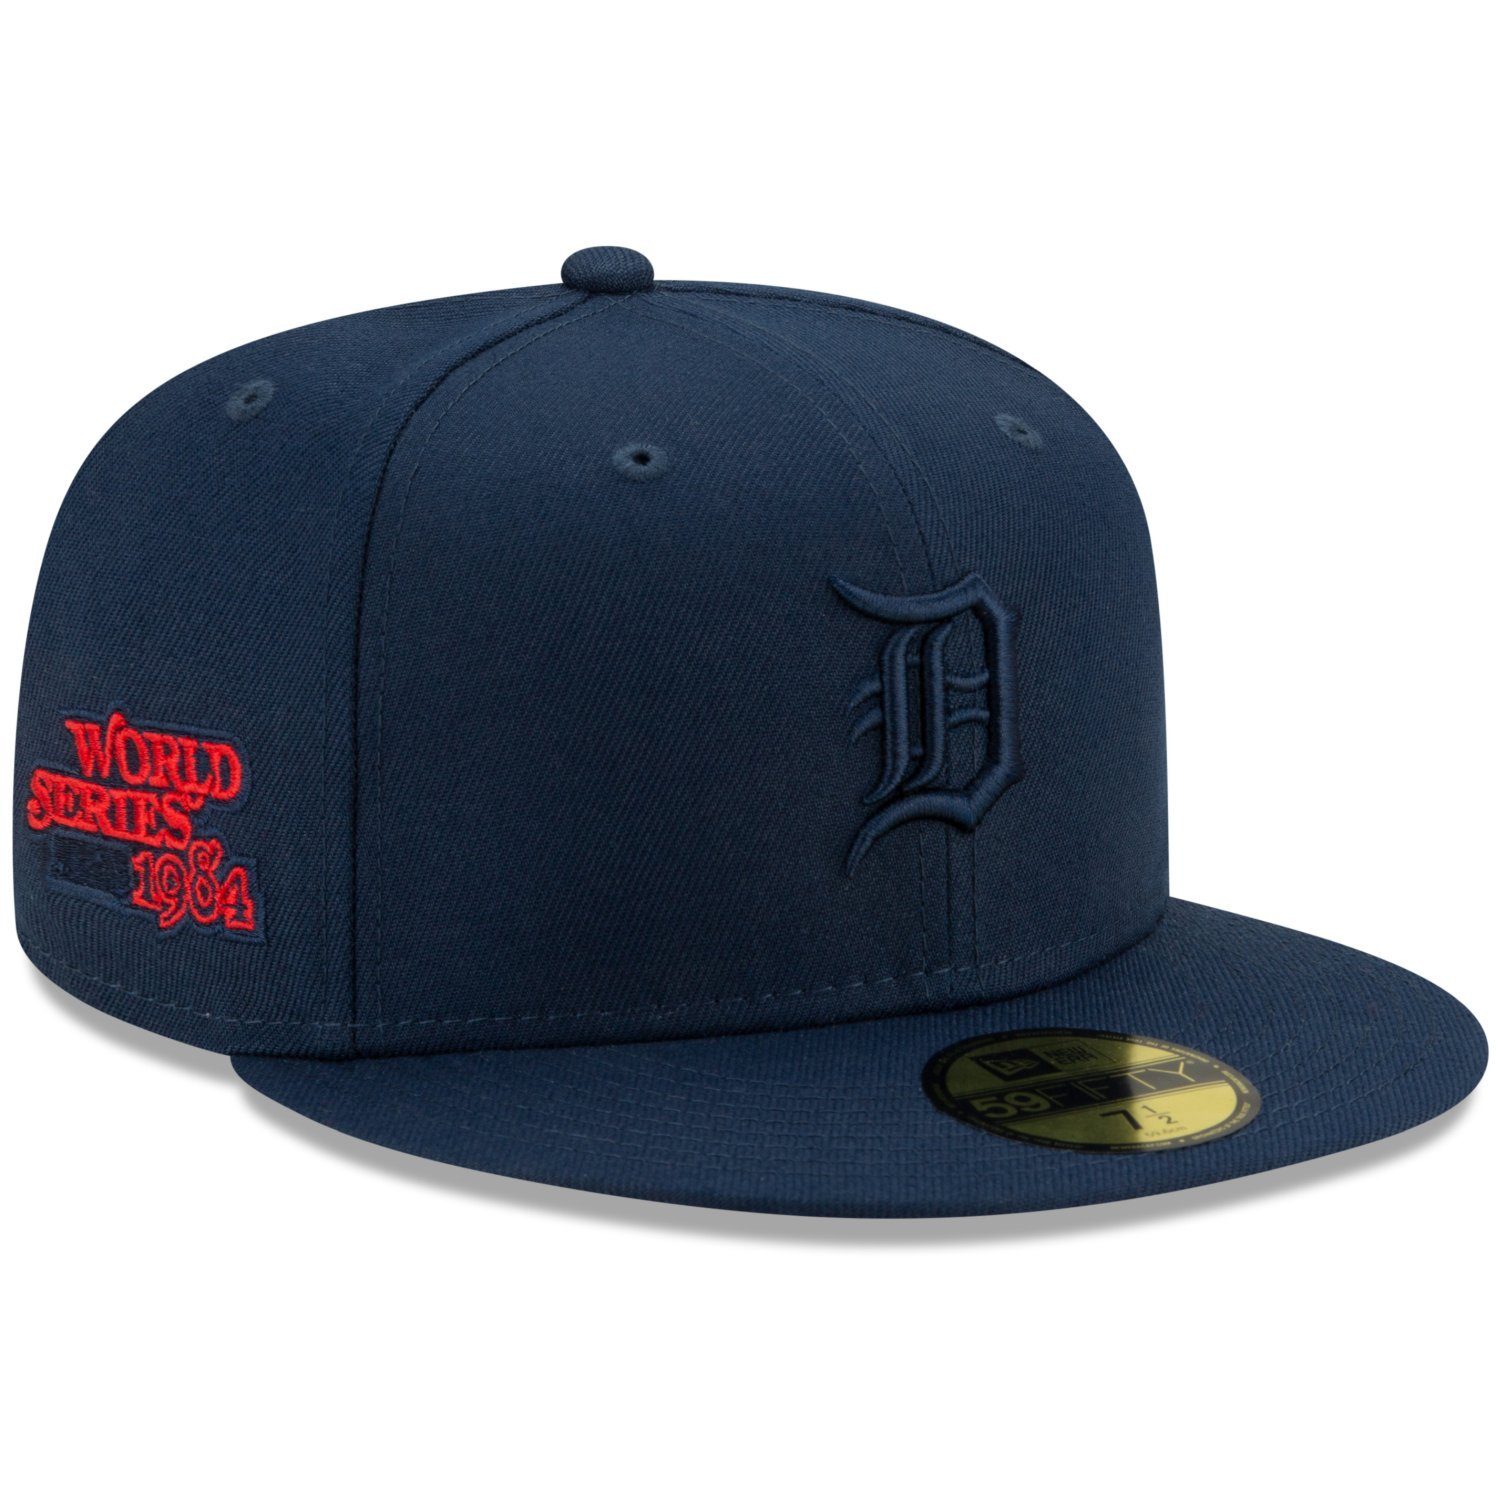 New Era Fitted Cap 59Fifty MLB WORLD SERIES Detroit Tigers